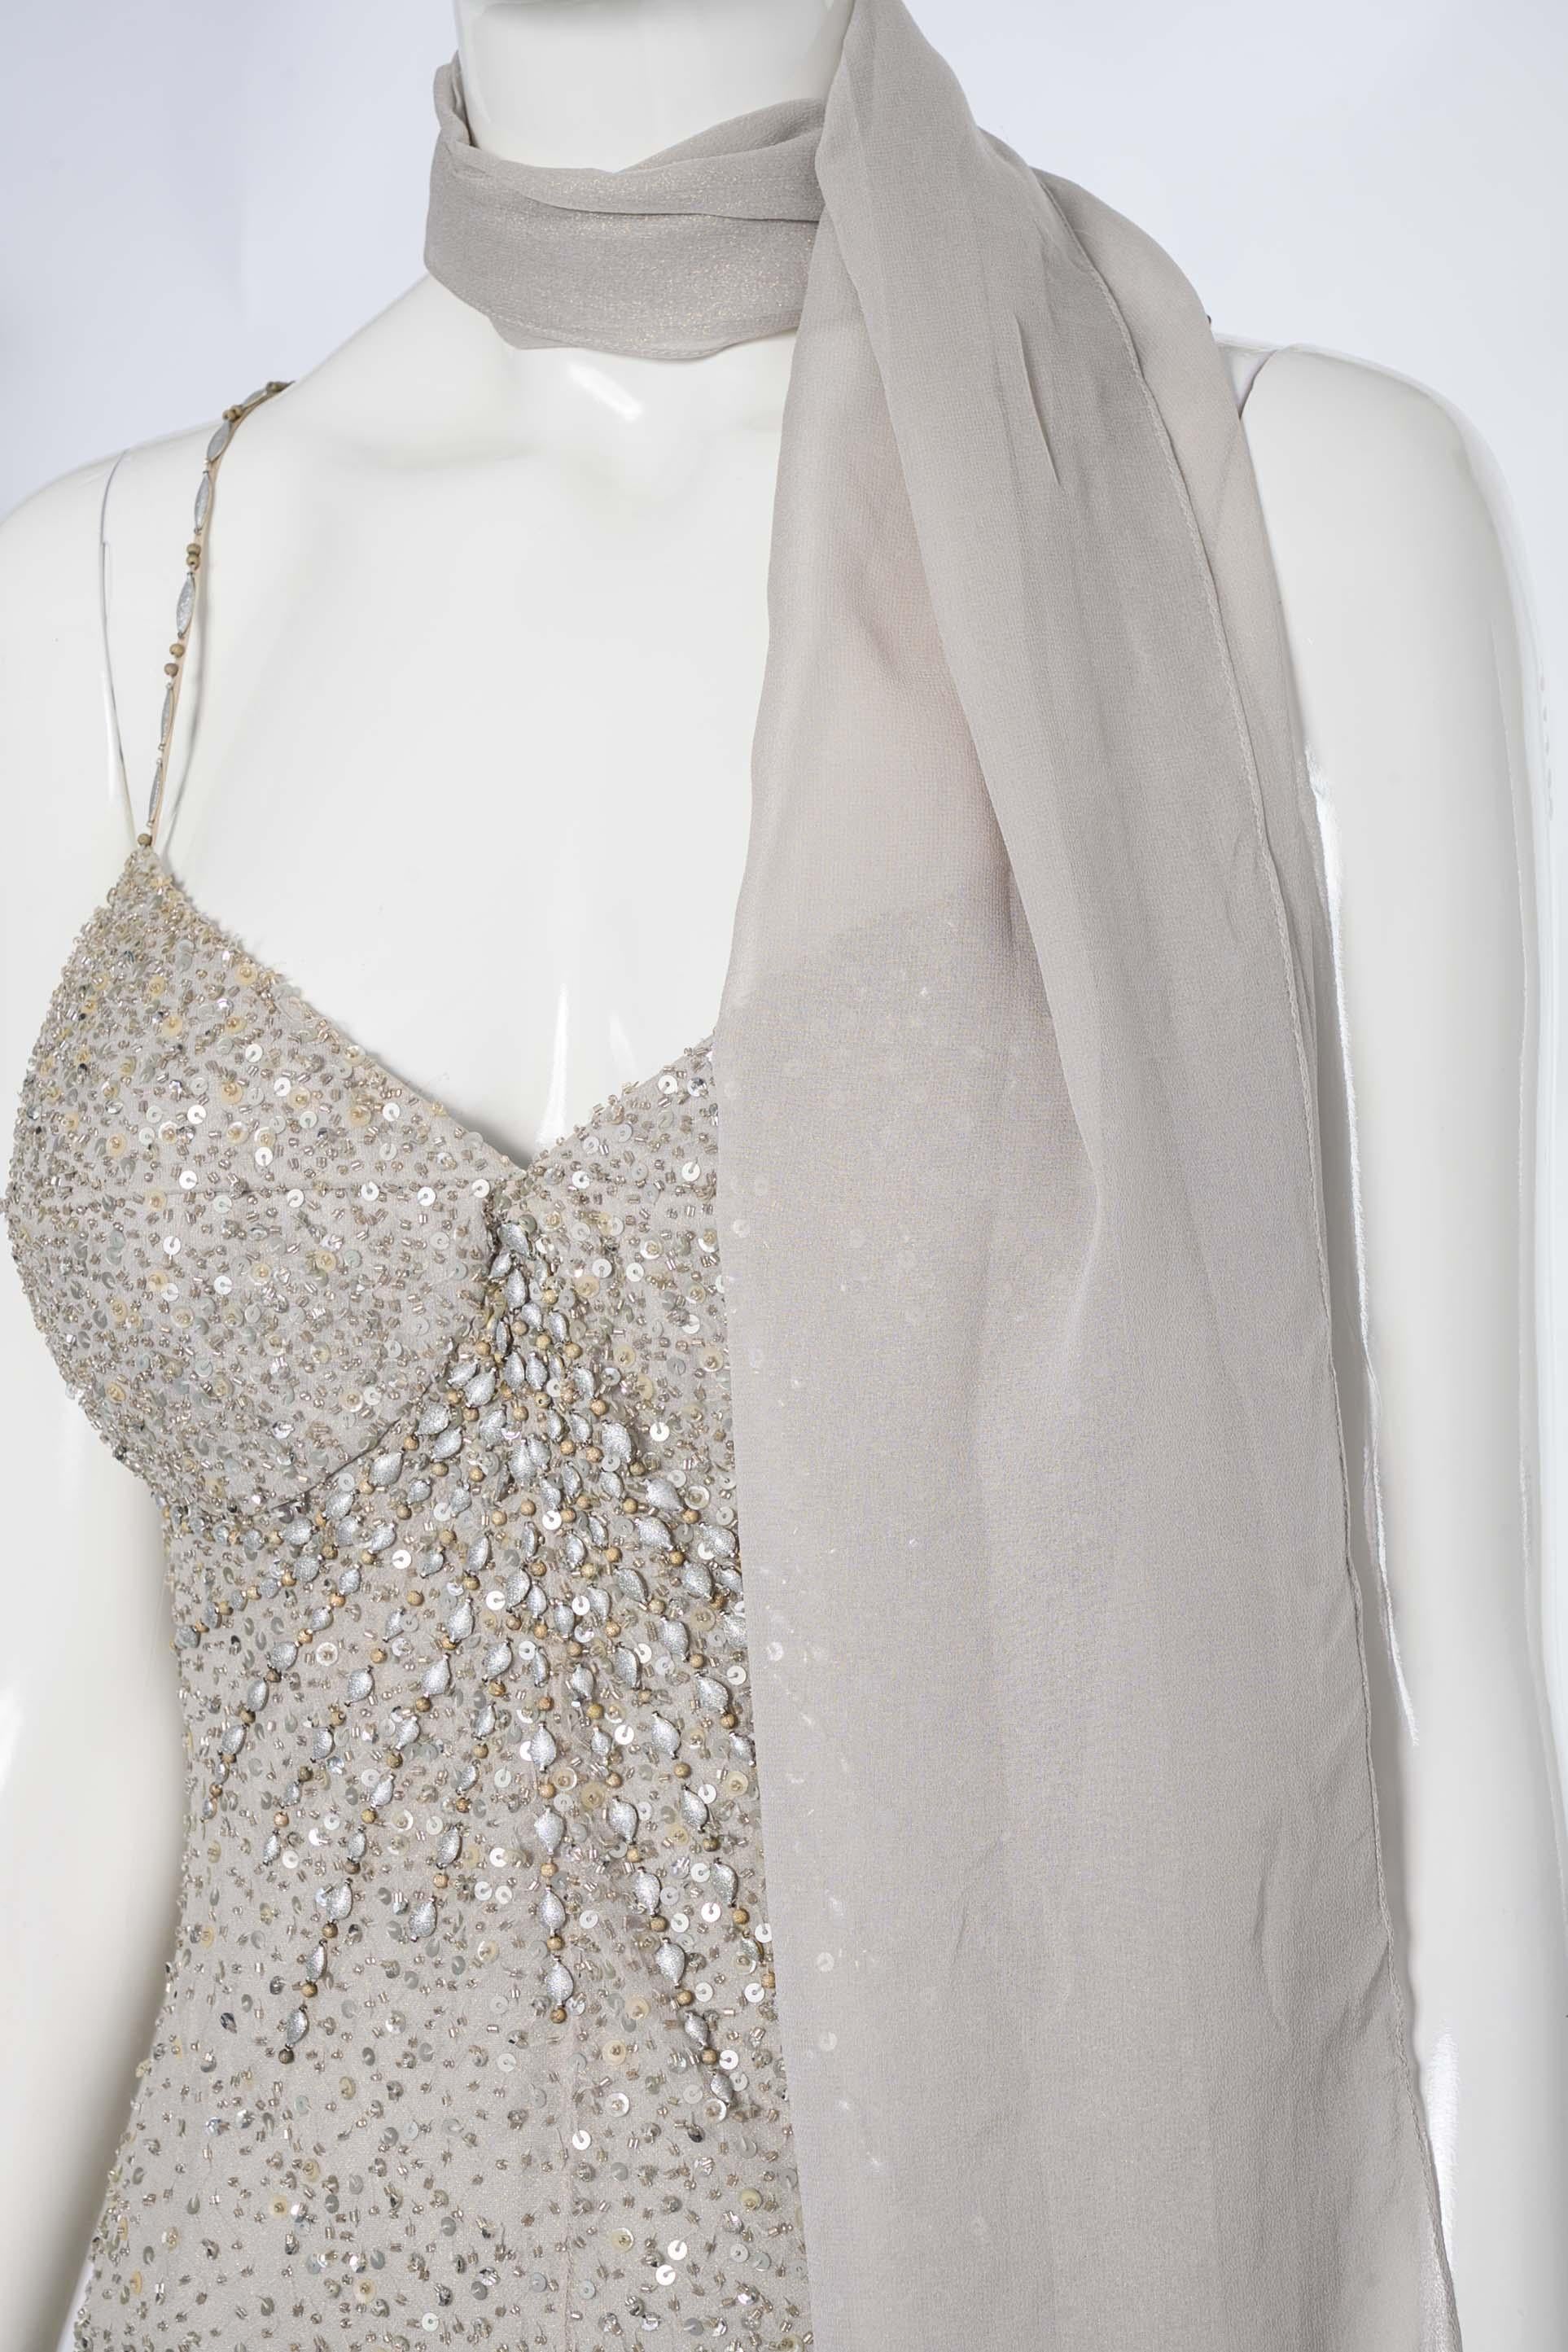 2000s Diane Freis Light Grey Sequinned Evening Dress In Excellent Condition For Sale In Hong Kong, HK